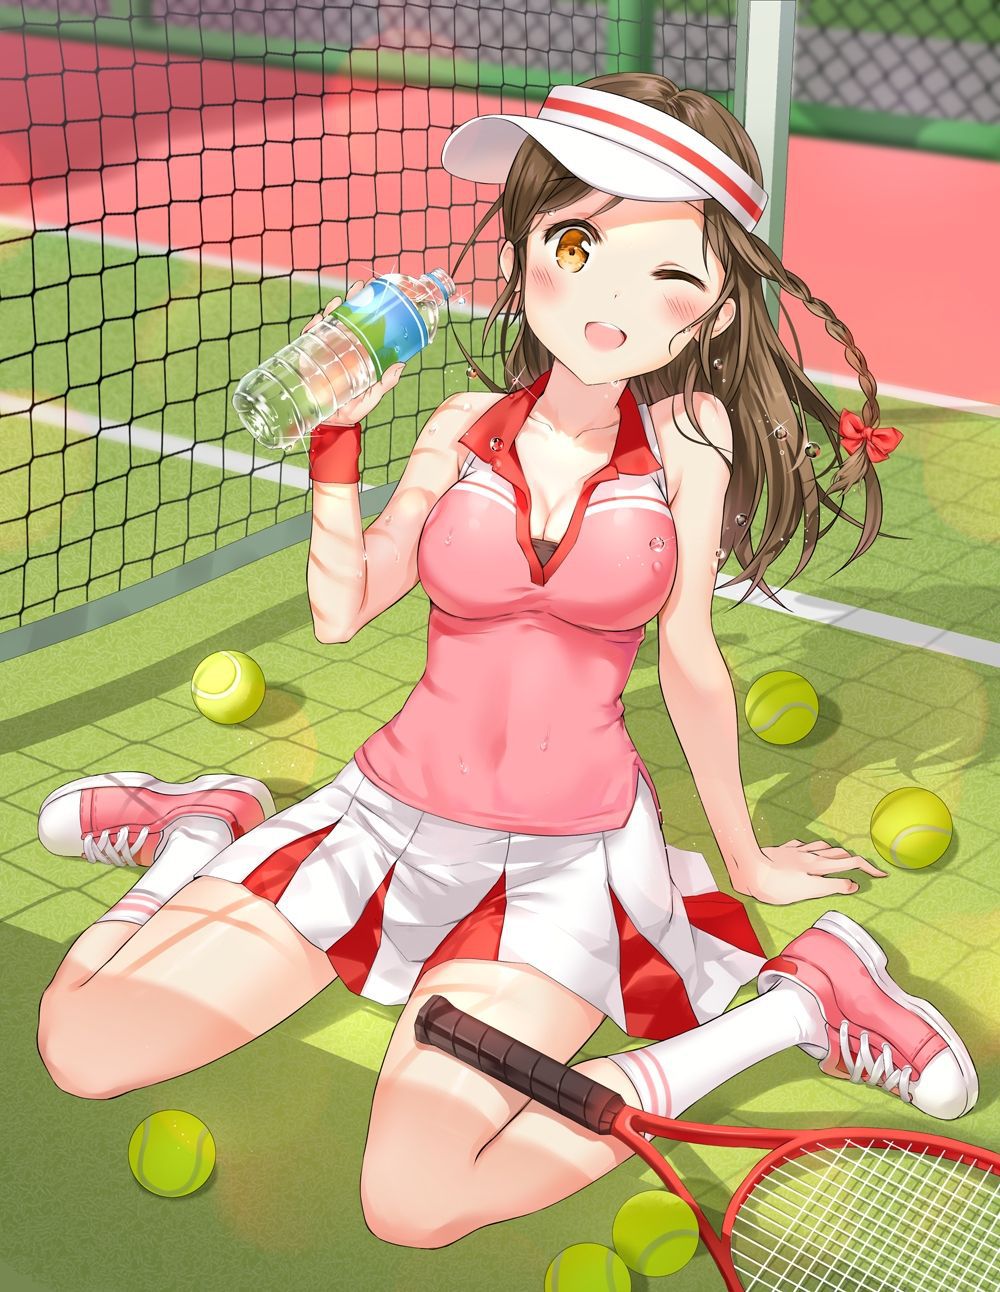 【Secondary erotic】 Here is an erotic image of a girl wearing sportswear and having a body conspicuous 6